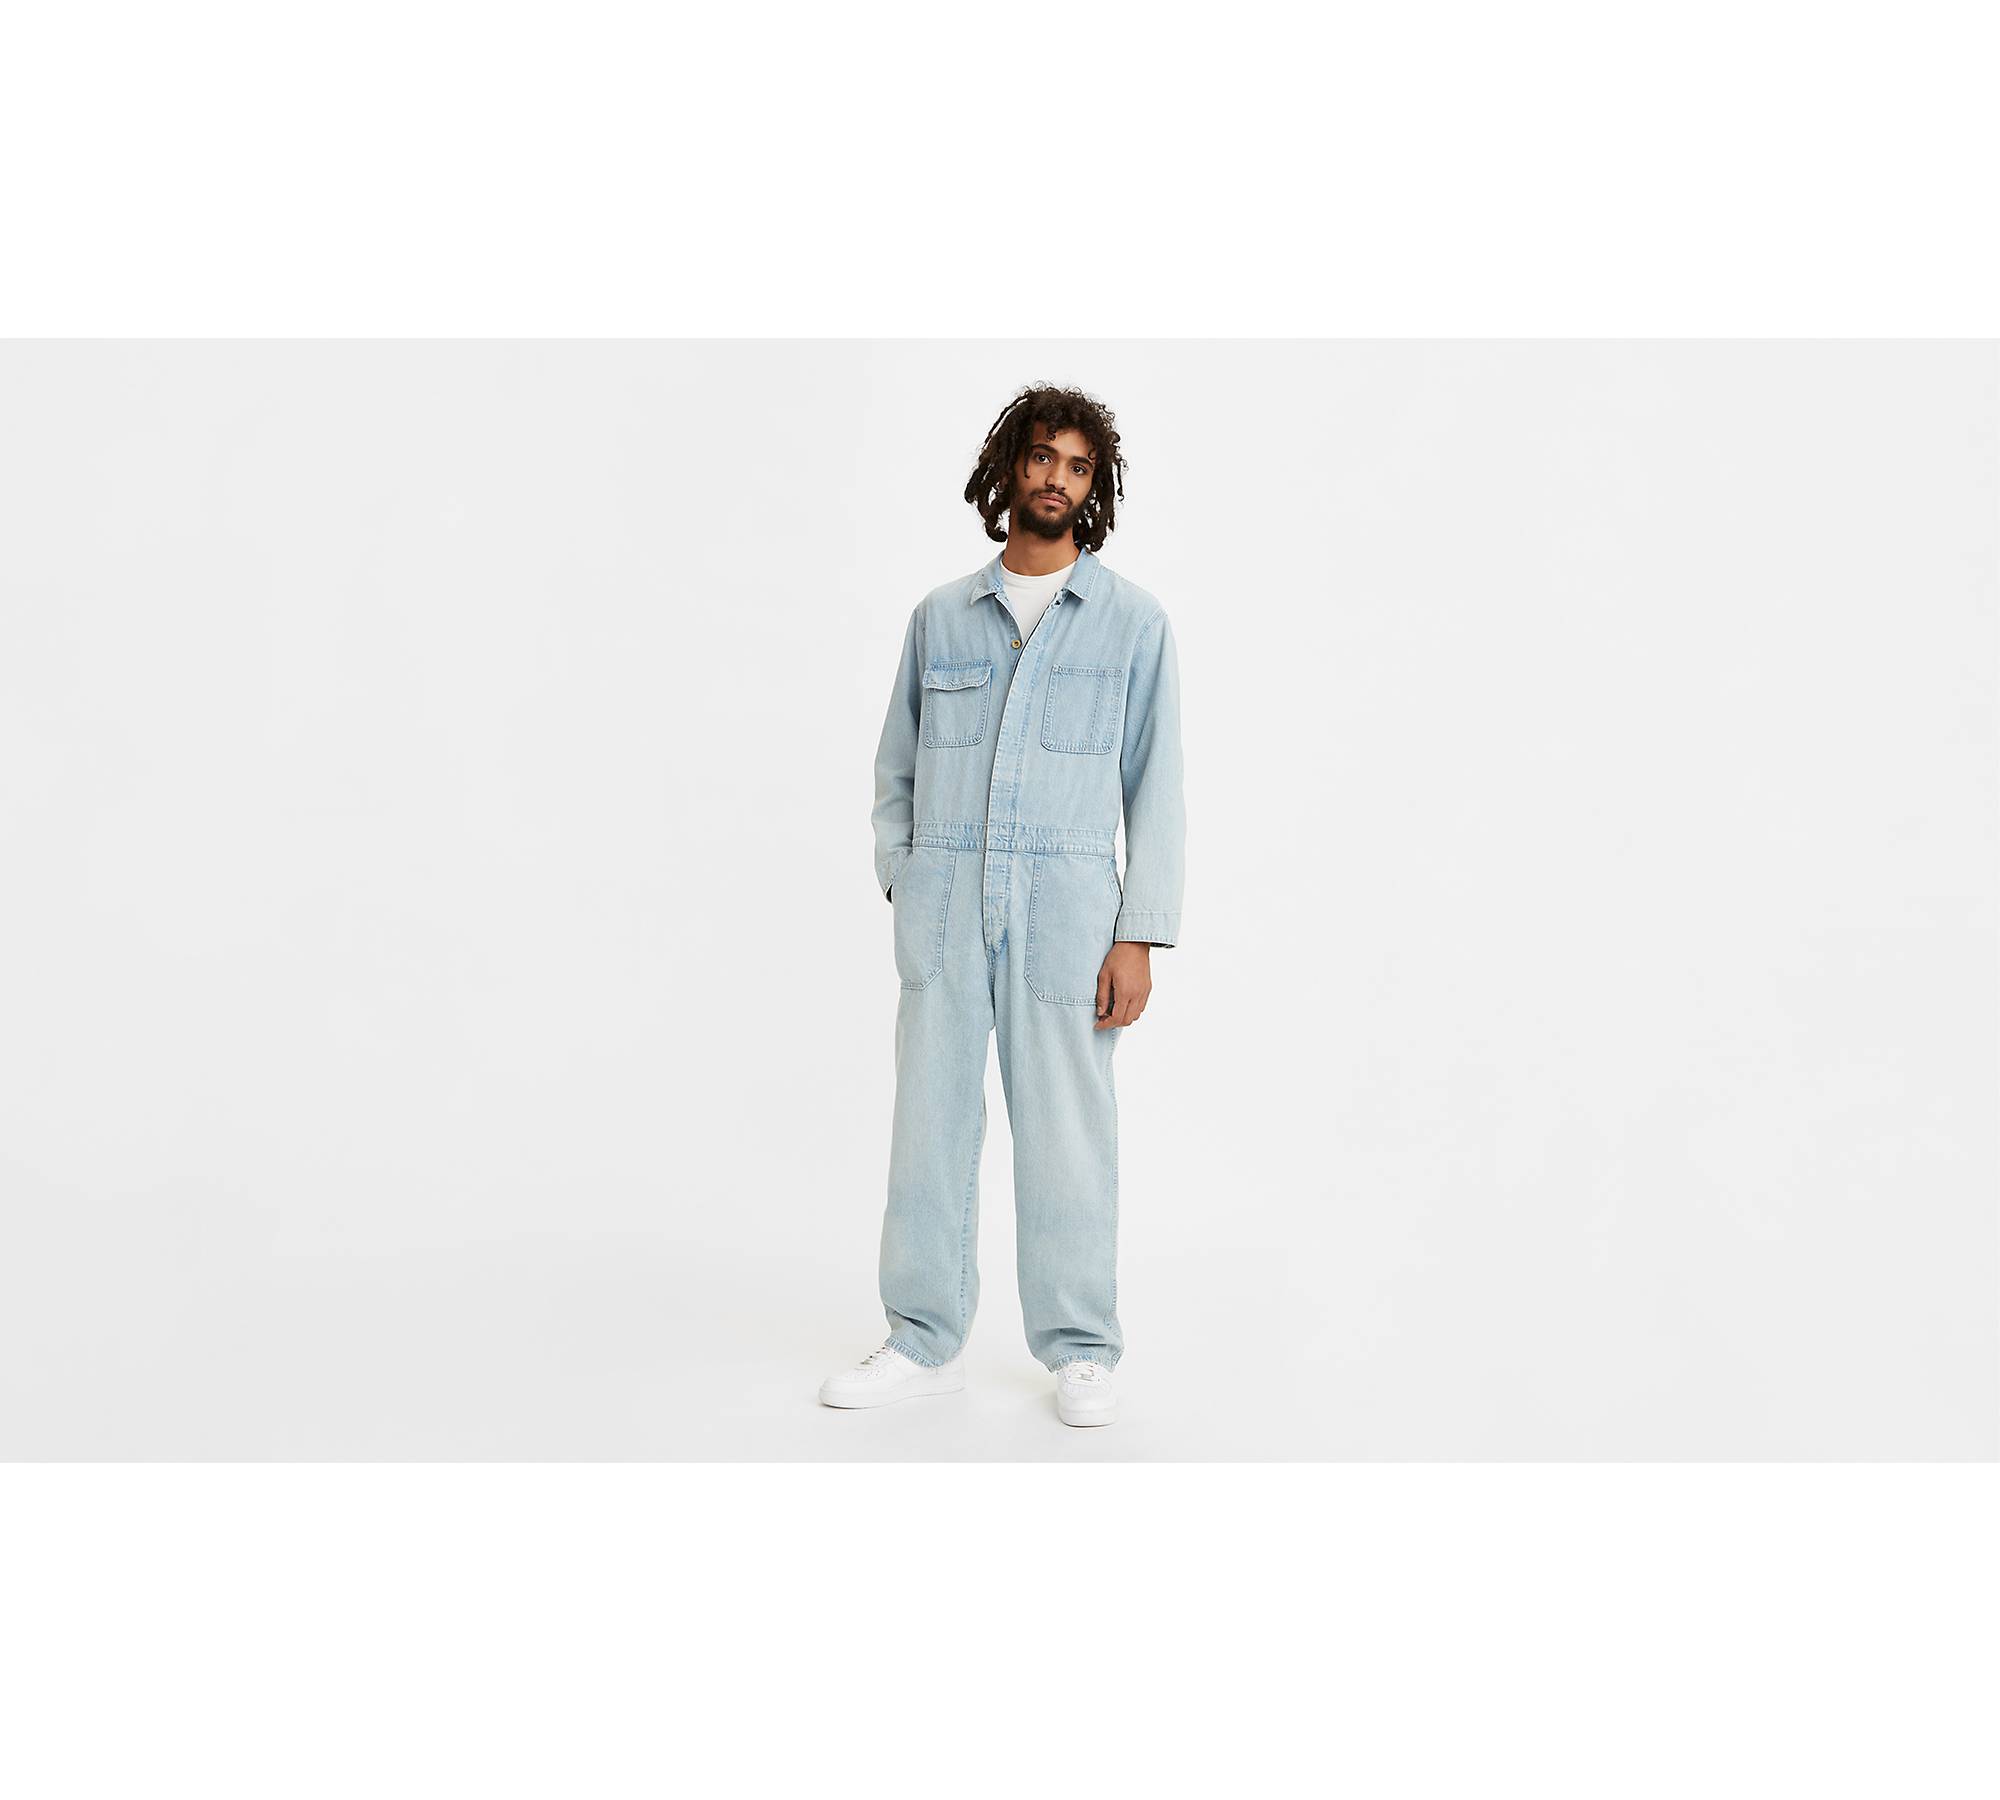 Stay Loose Denim Coveralls - Light Wash